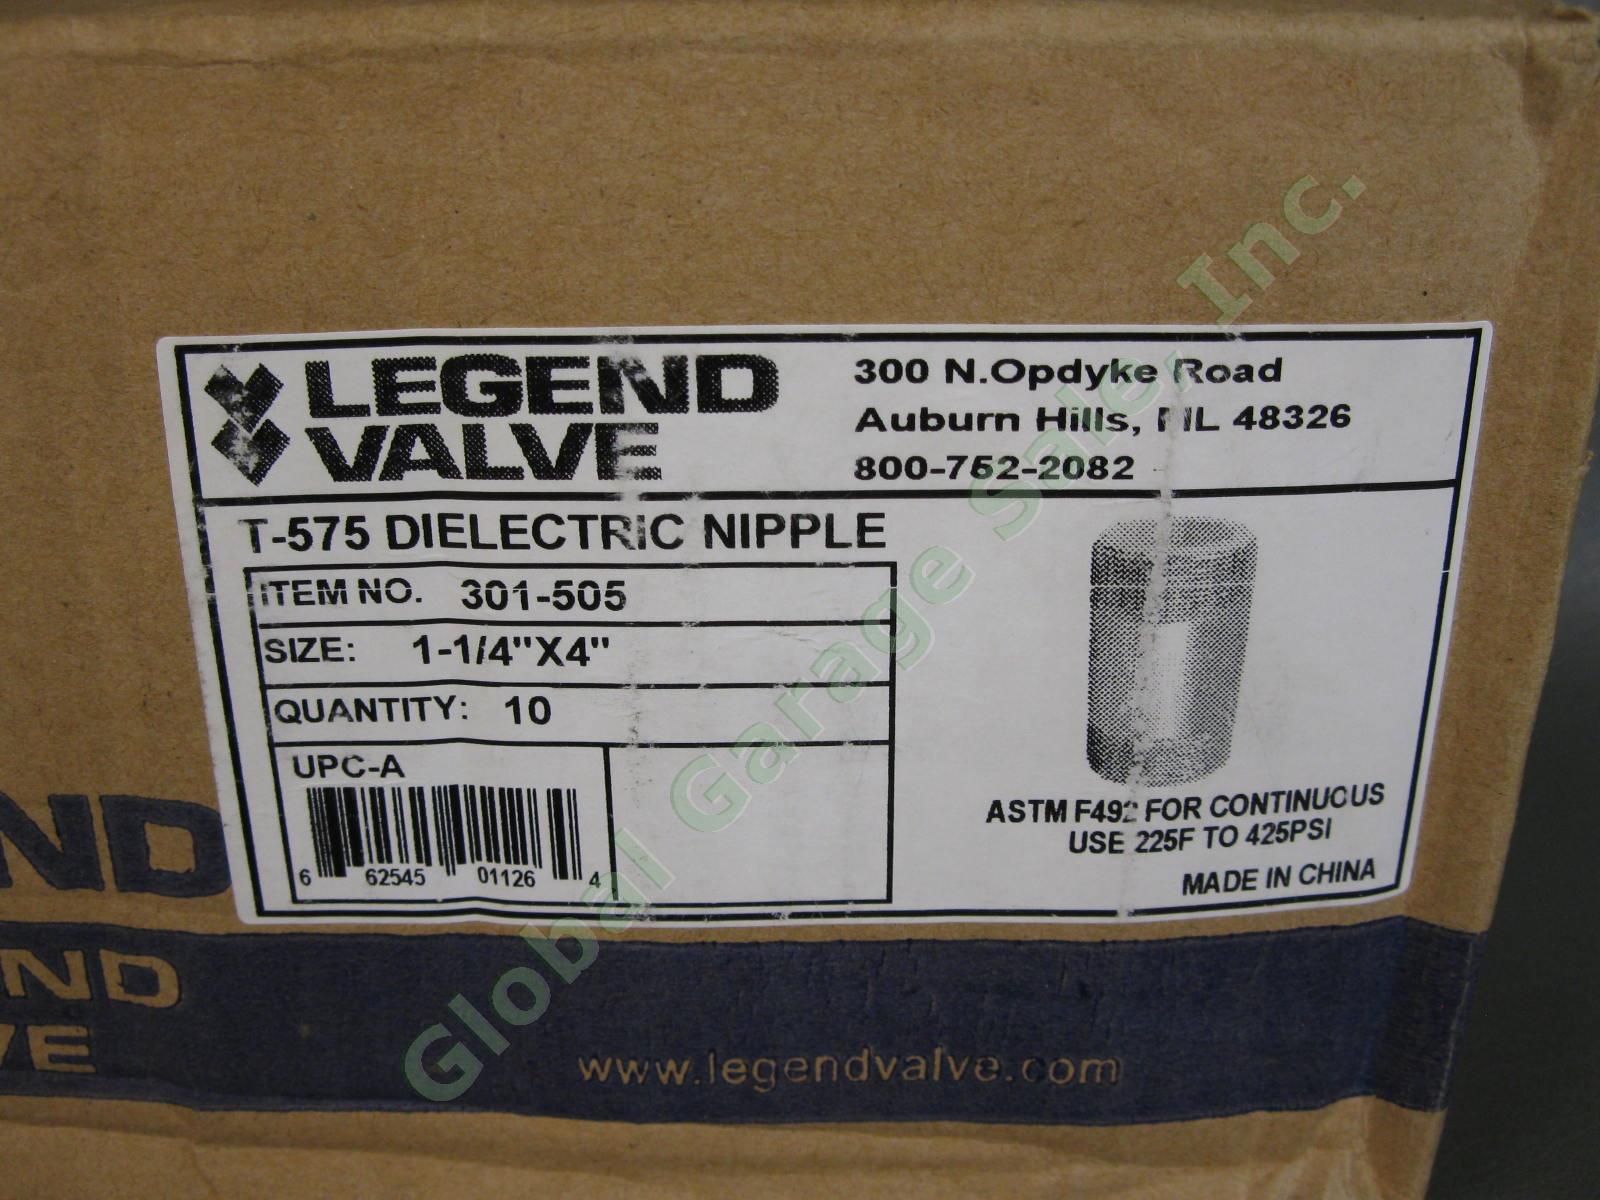 10 NEW Legend Valves T-575 Dielectric Nipple 1 1/4" by 4" 225F 425PSI #301-505 2